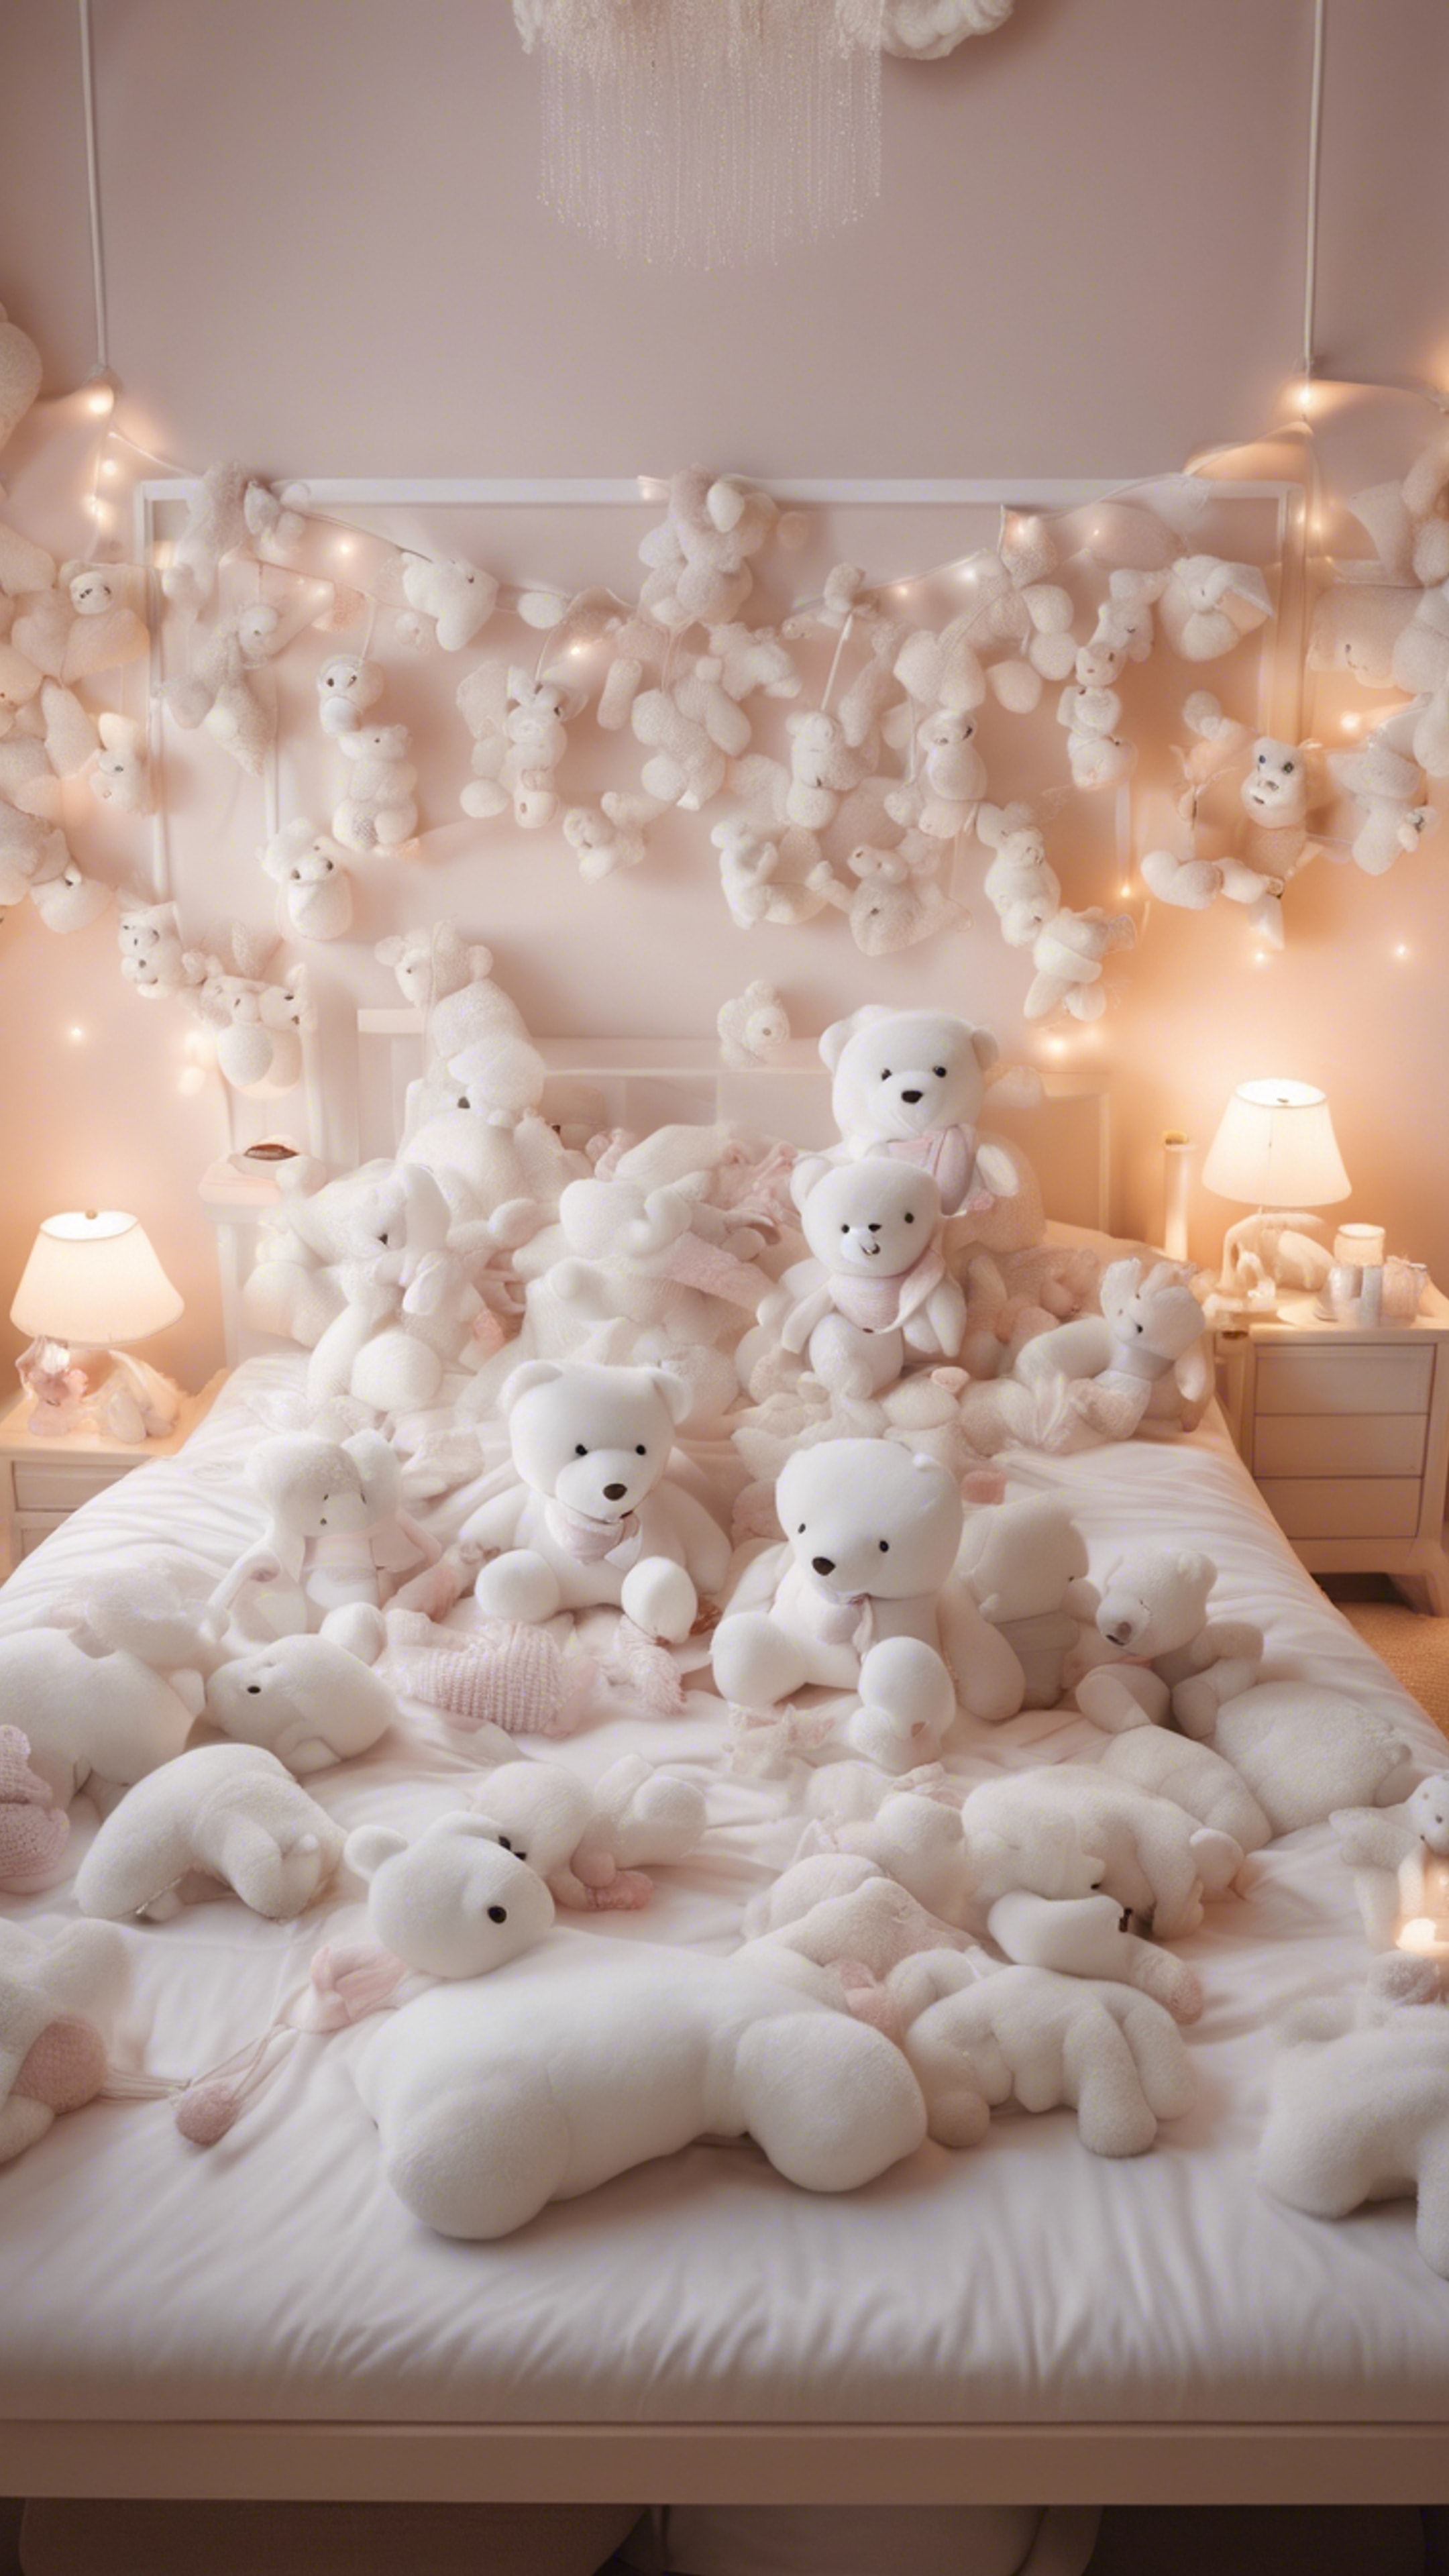 A kawaii style decorated bedroom, filled with white teddies and cushions. Tapeta[9112291410ac42cead00]